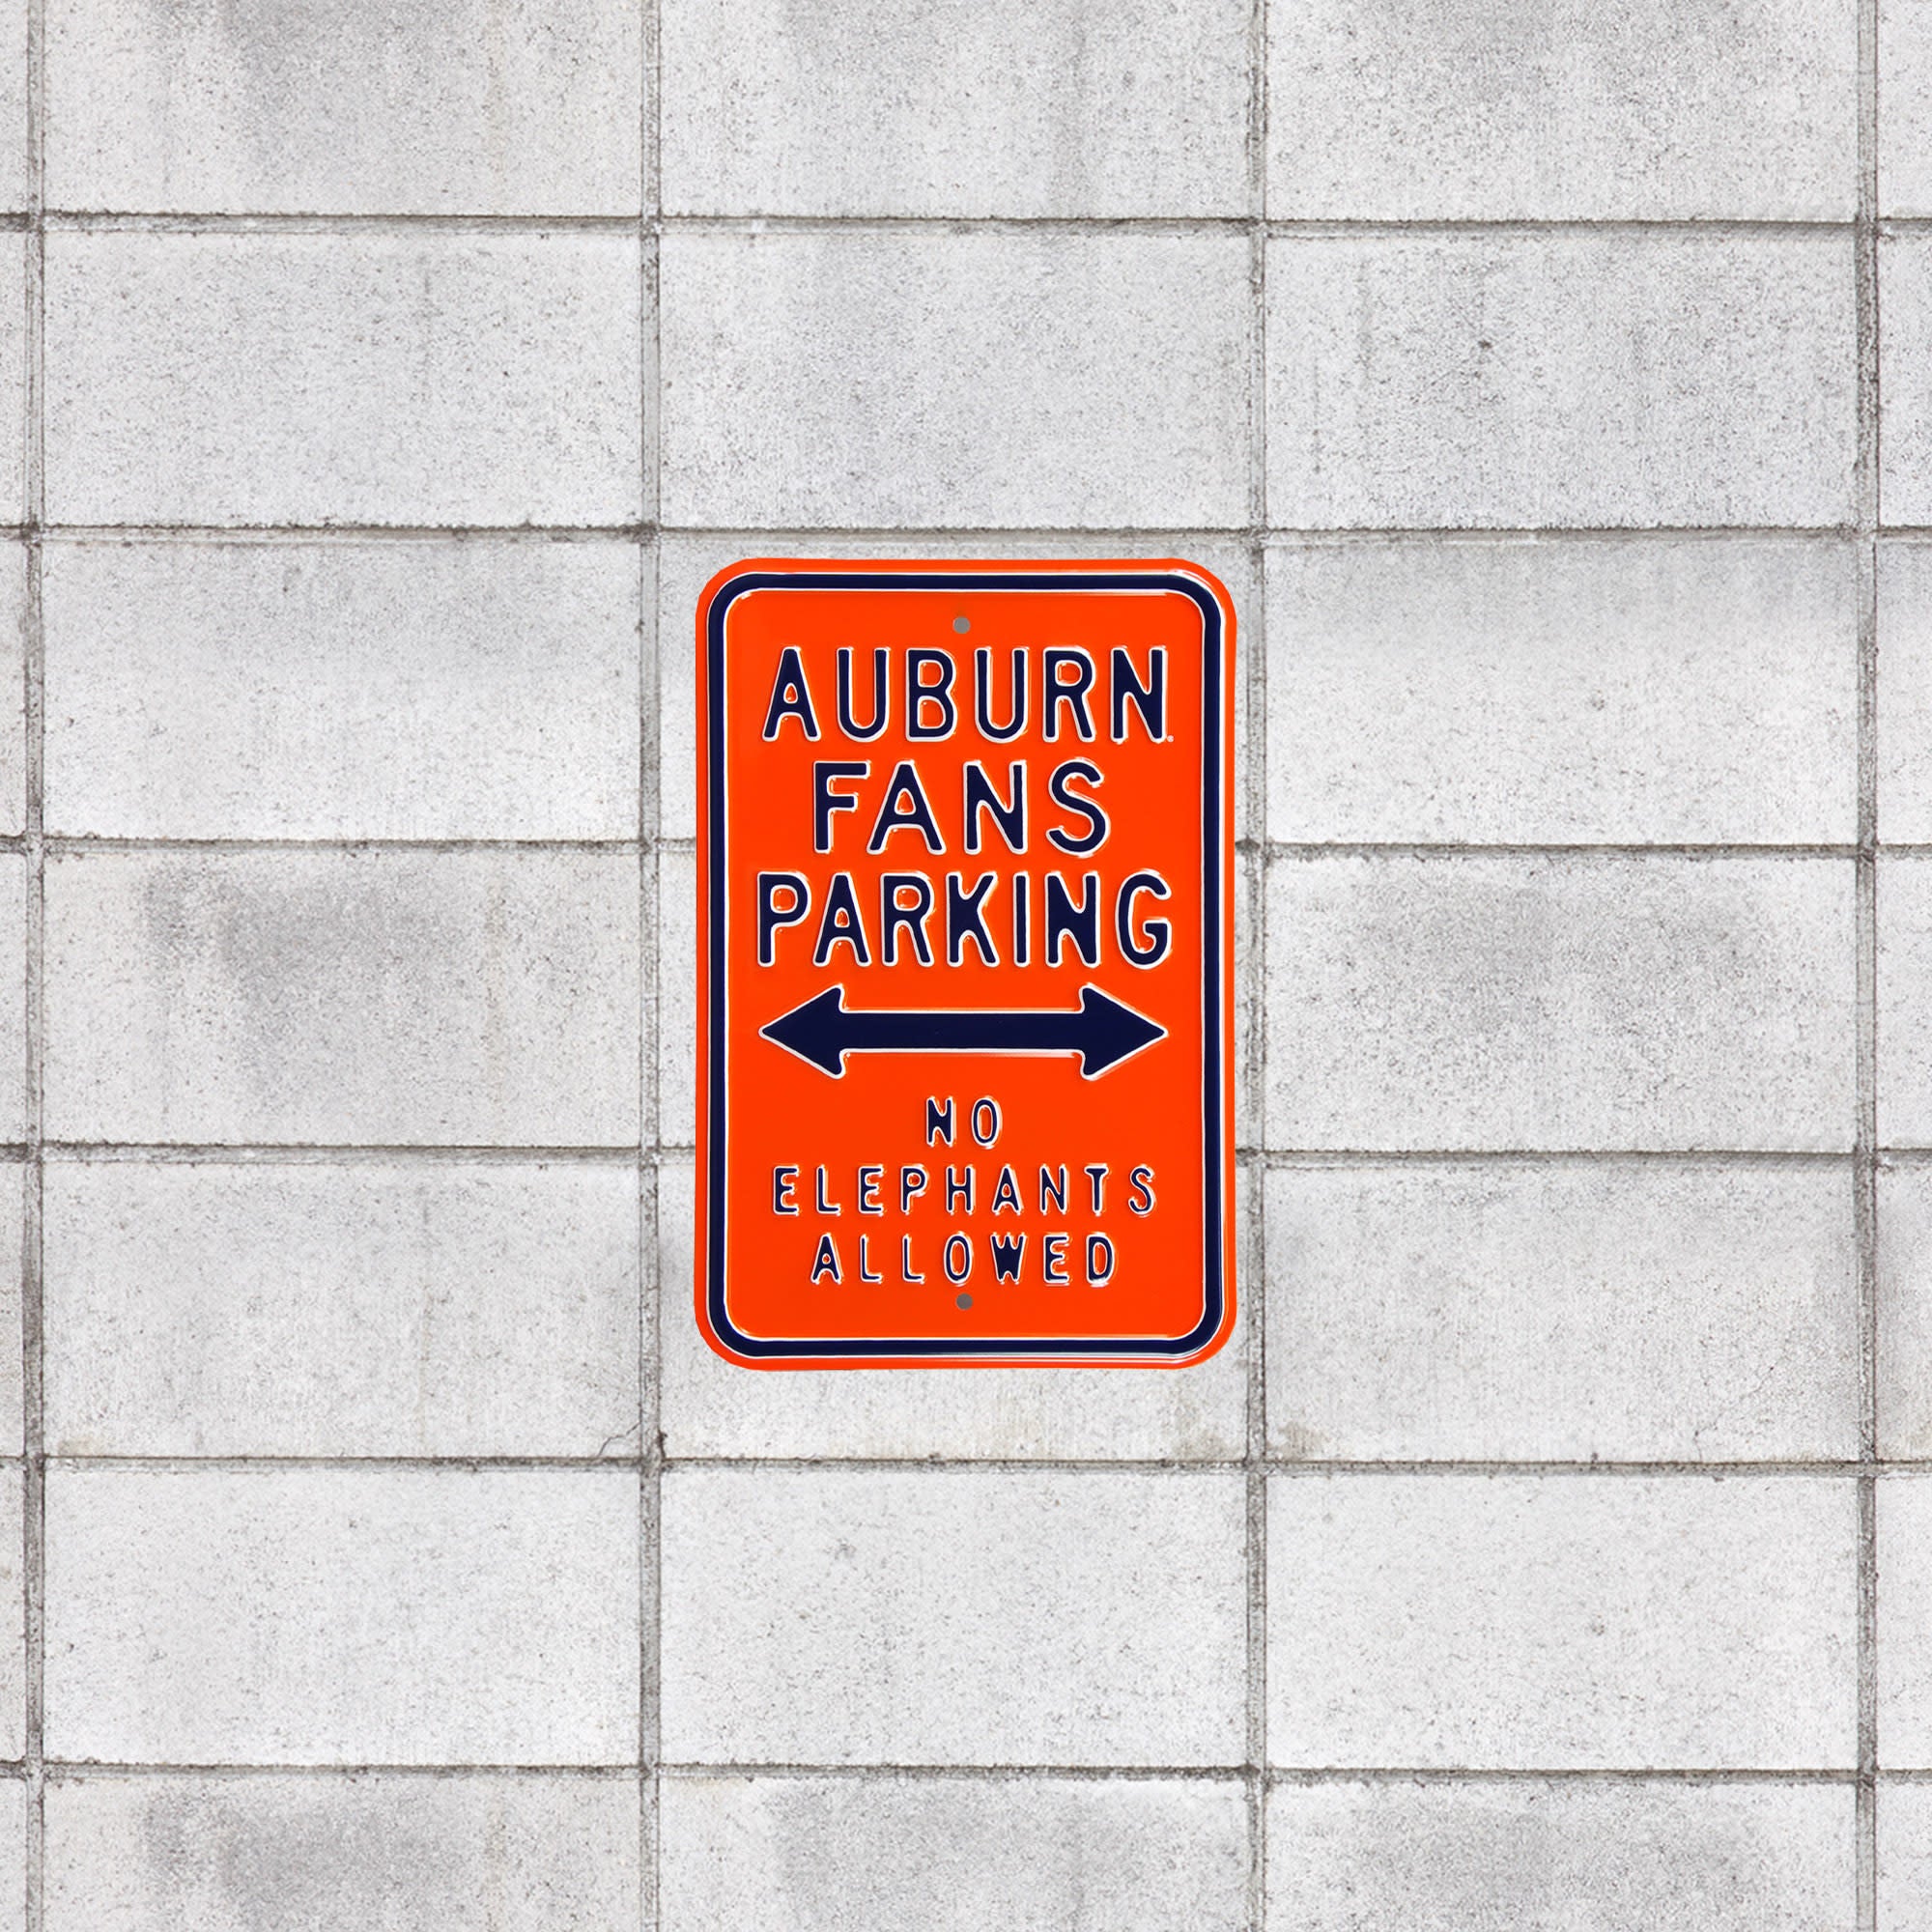 Auburn Tigers: No Elephants Parking - Officially Licensed Metal Street Sign 18.0"W x 12.0"H by Fathead | 100% Steel